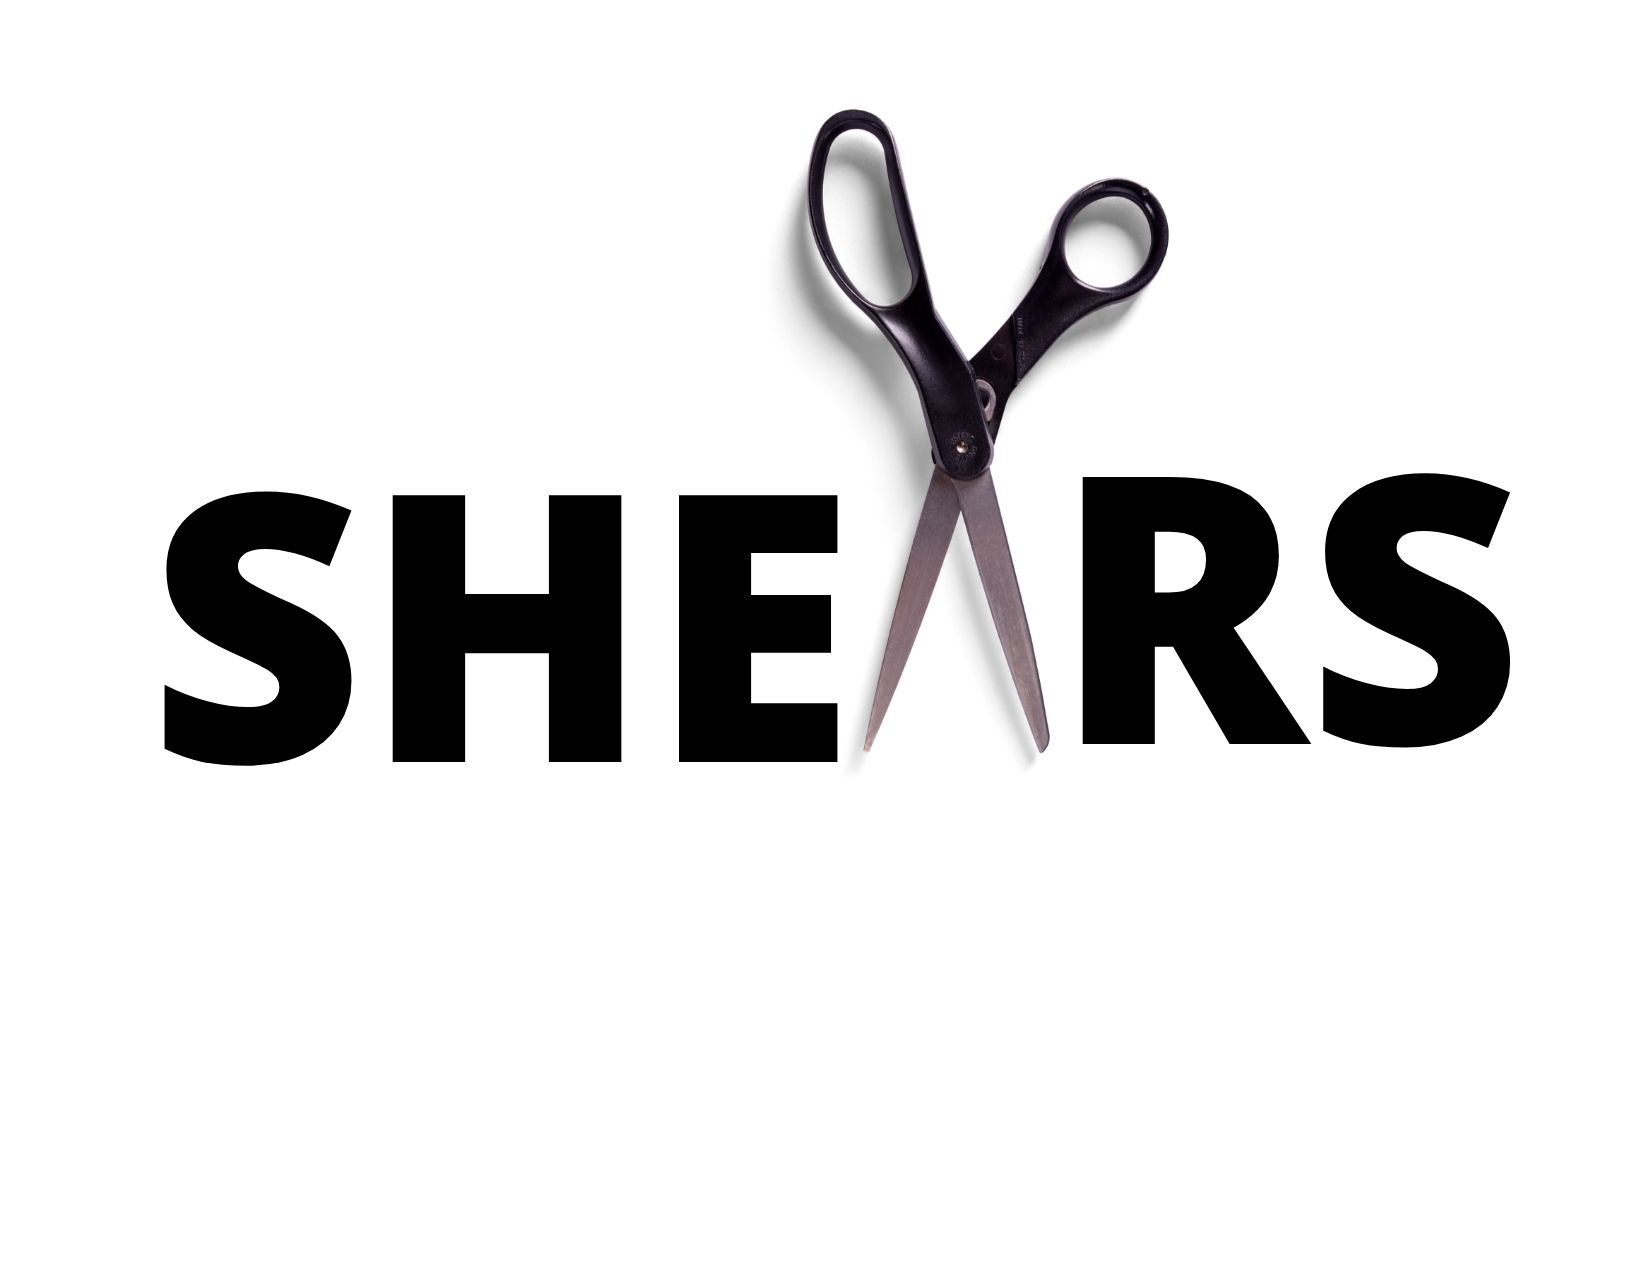 the word shears with the a represented by scissors to show the difference between shears and sheers